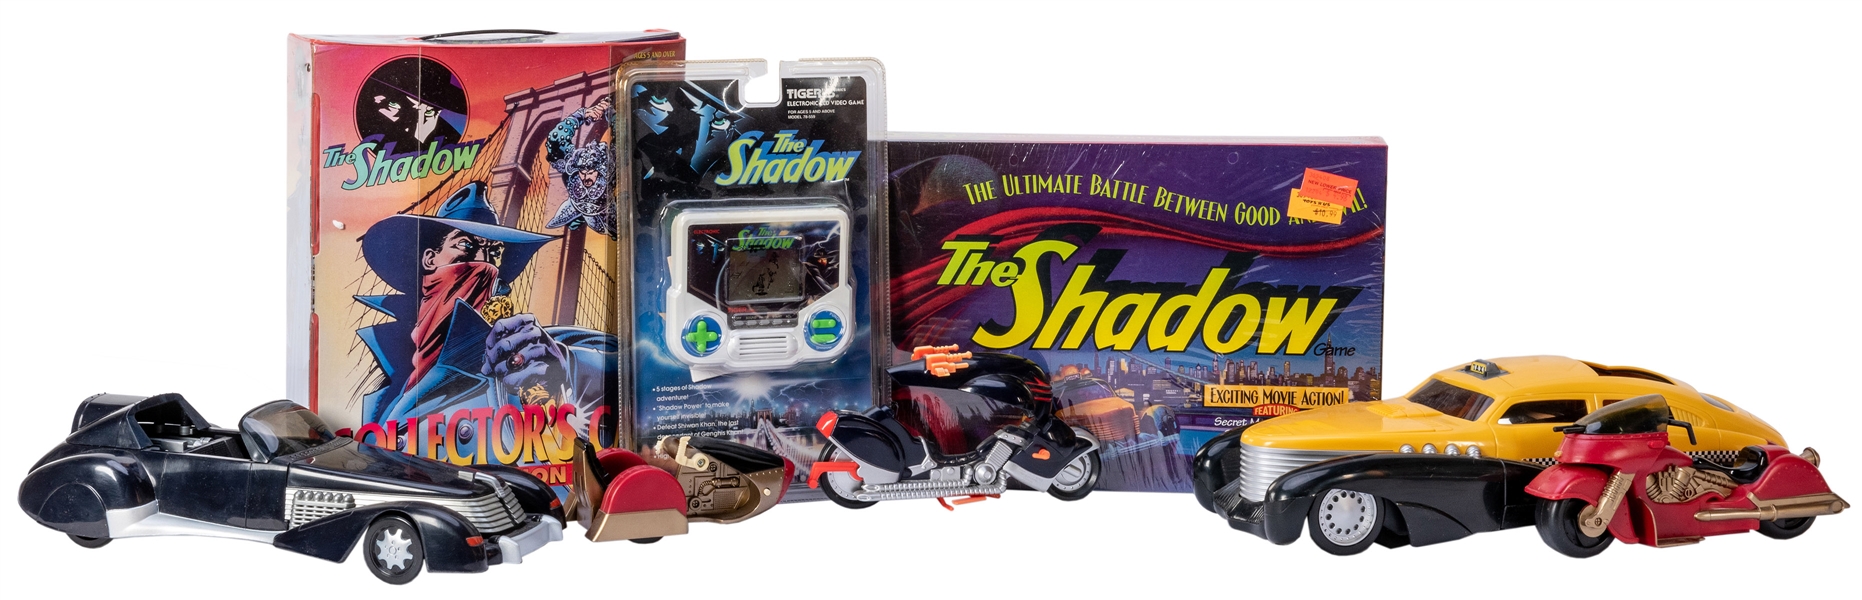  Collection of The Shadow Action Figures, Vehicles, and Games. 17pcs. 